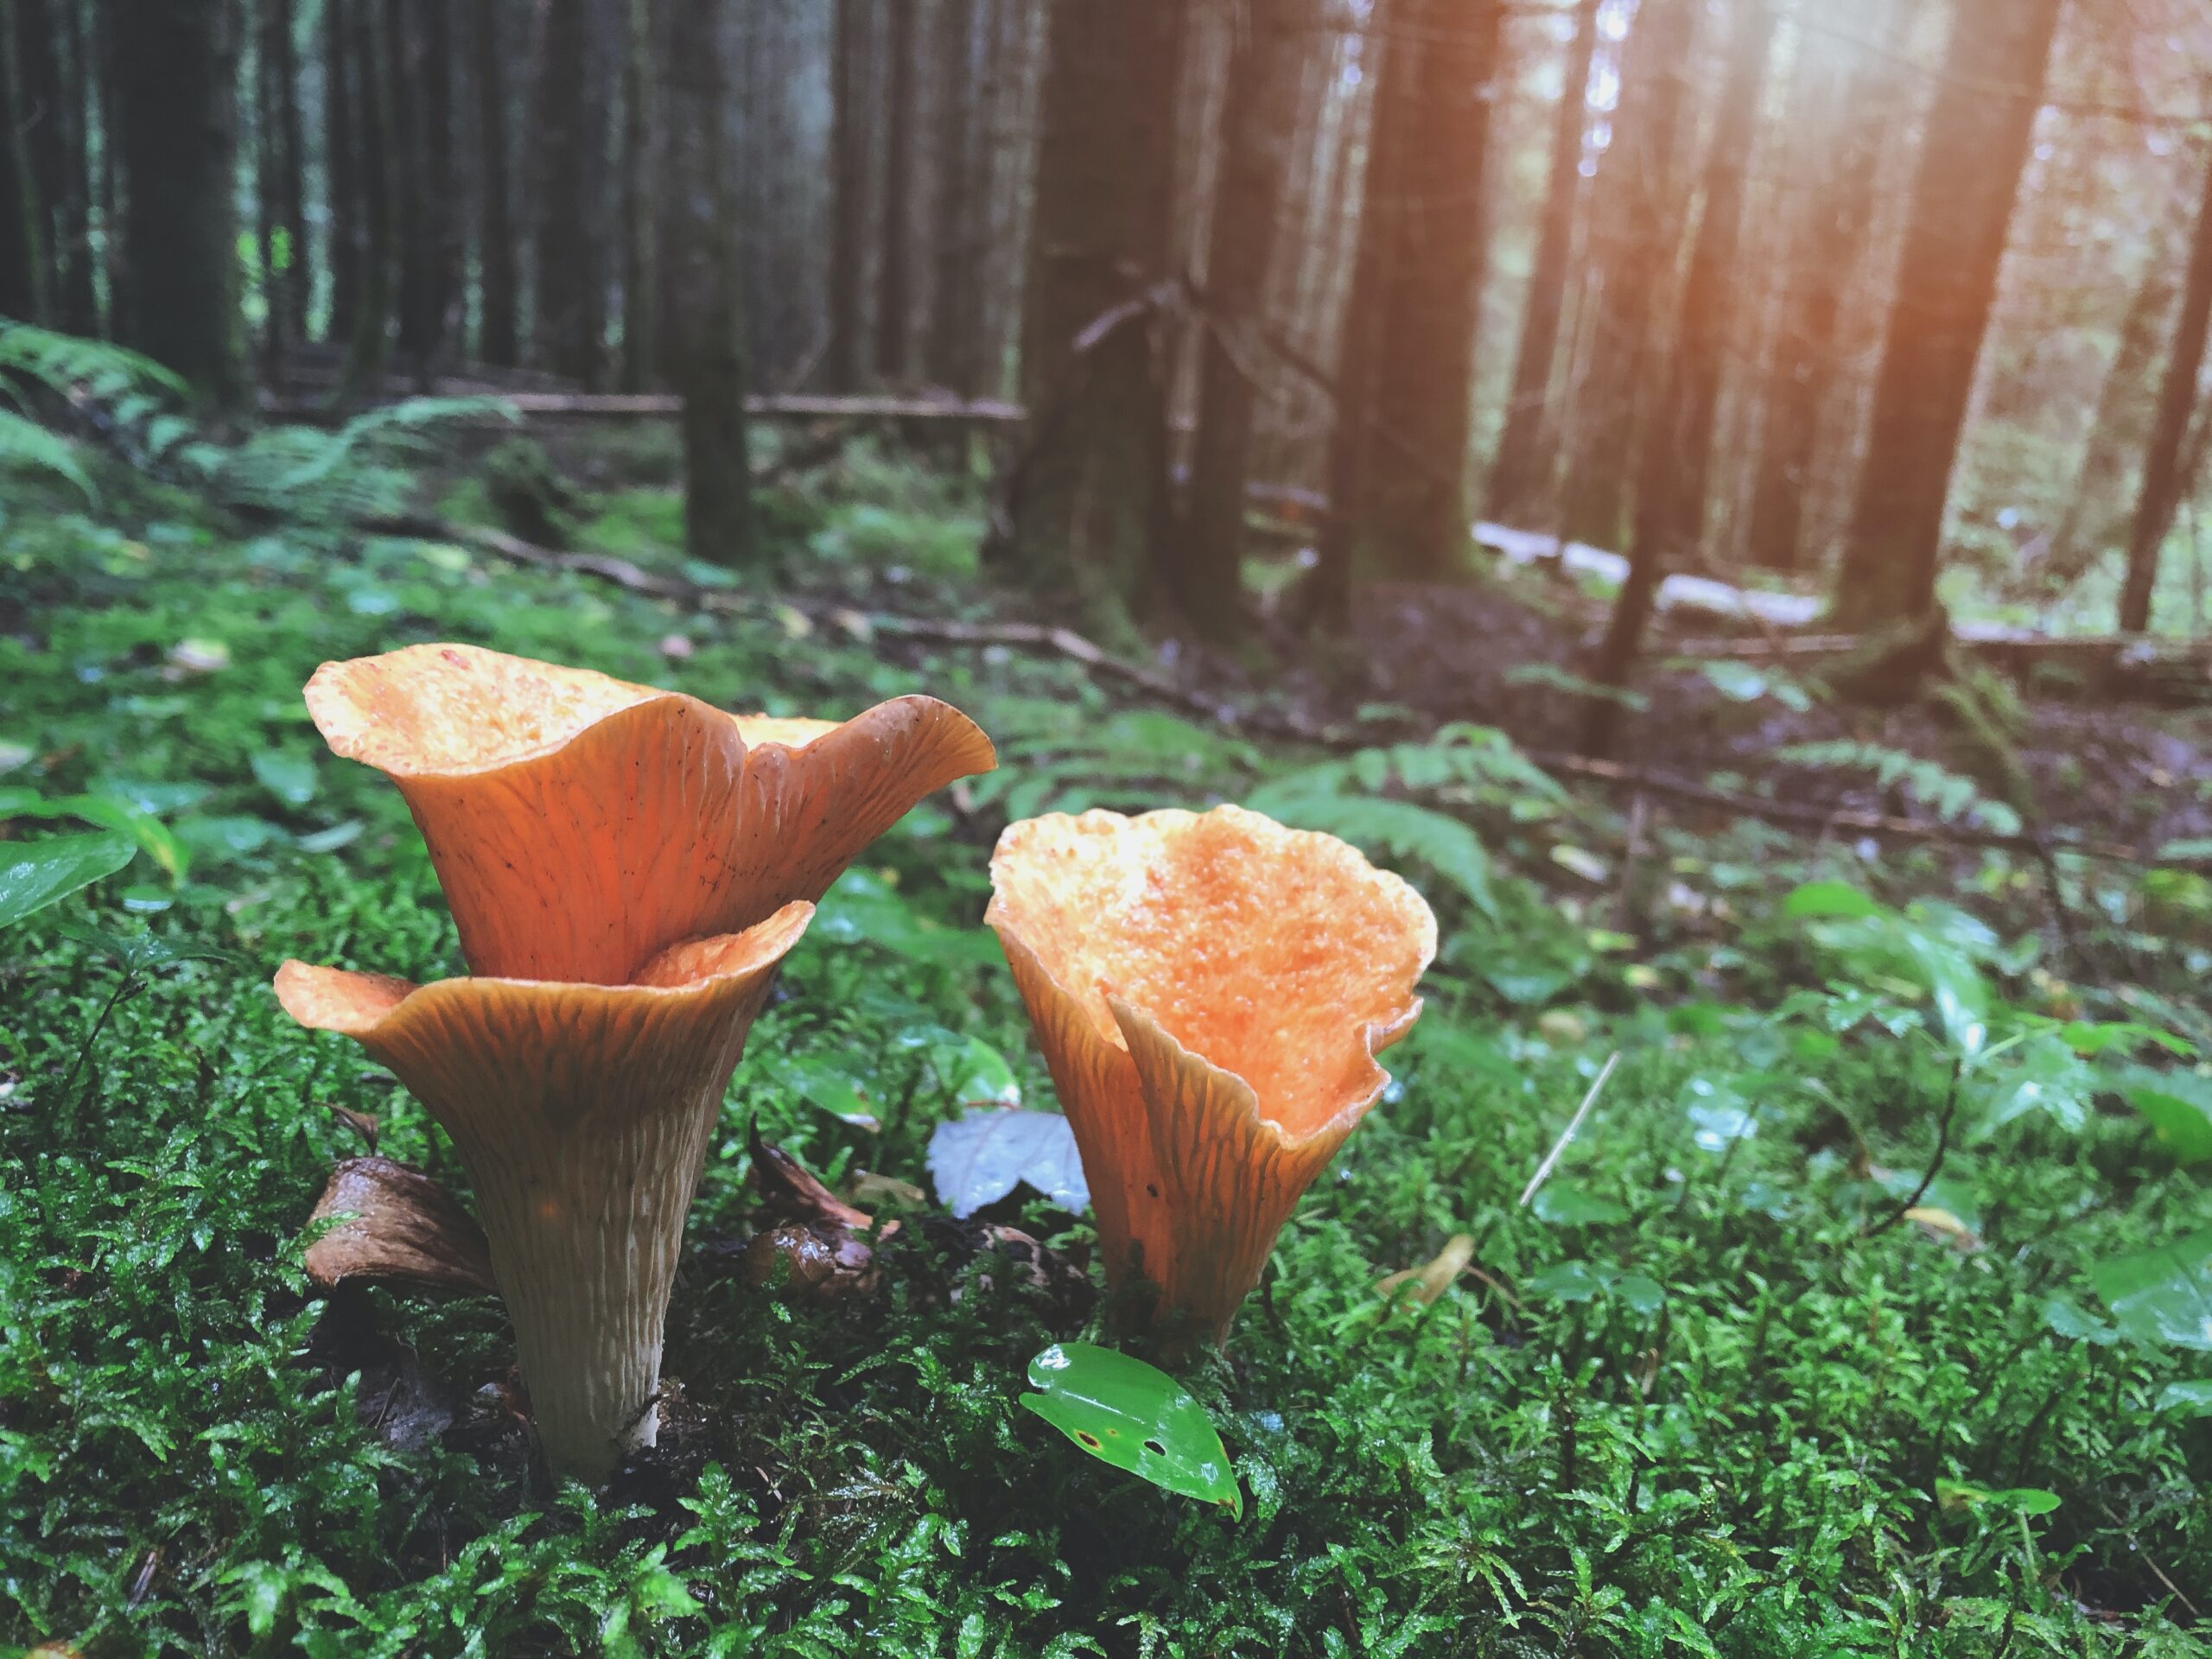 Photo of mushrooms in a forest.